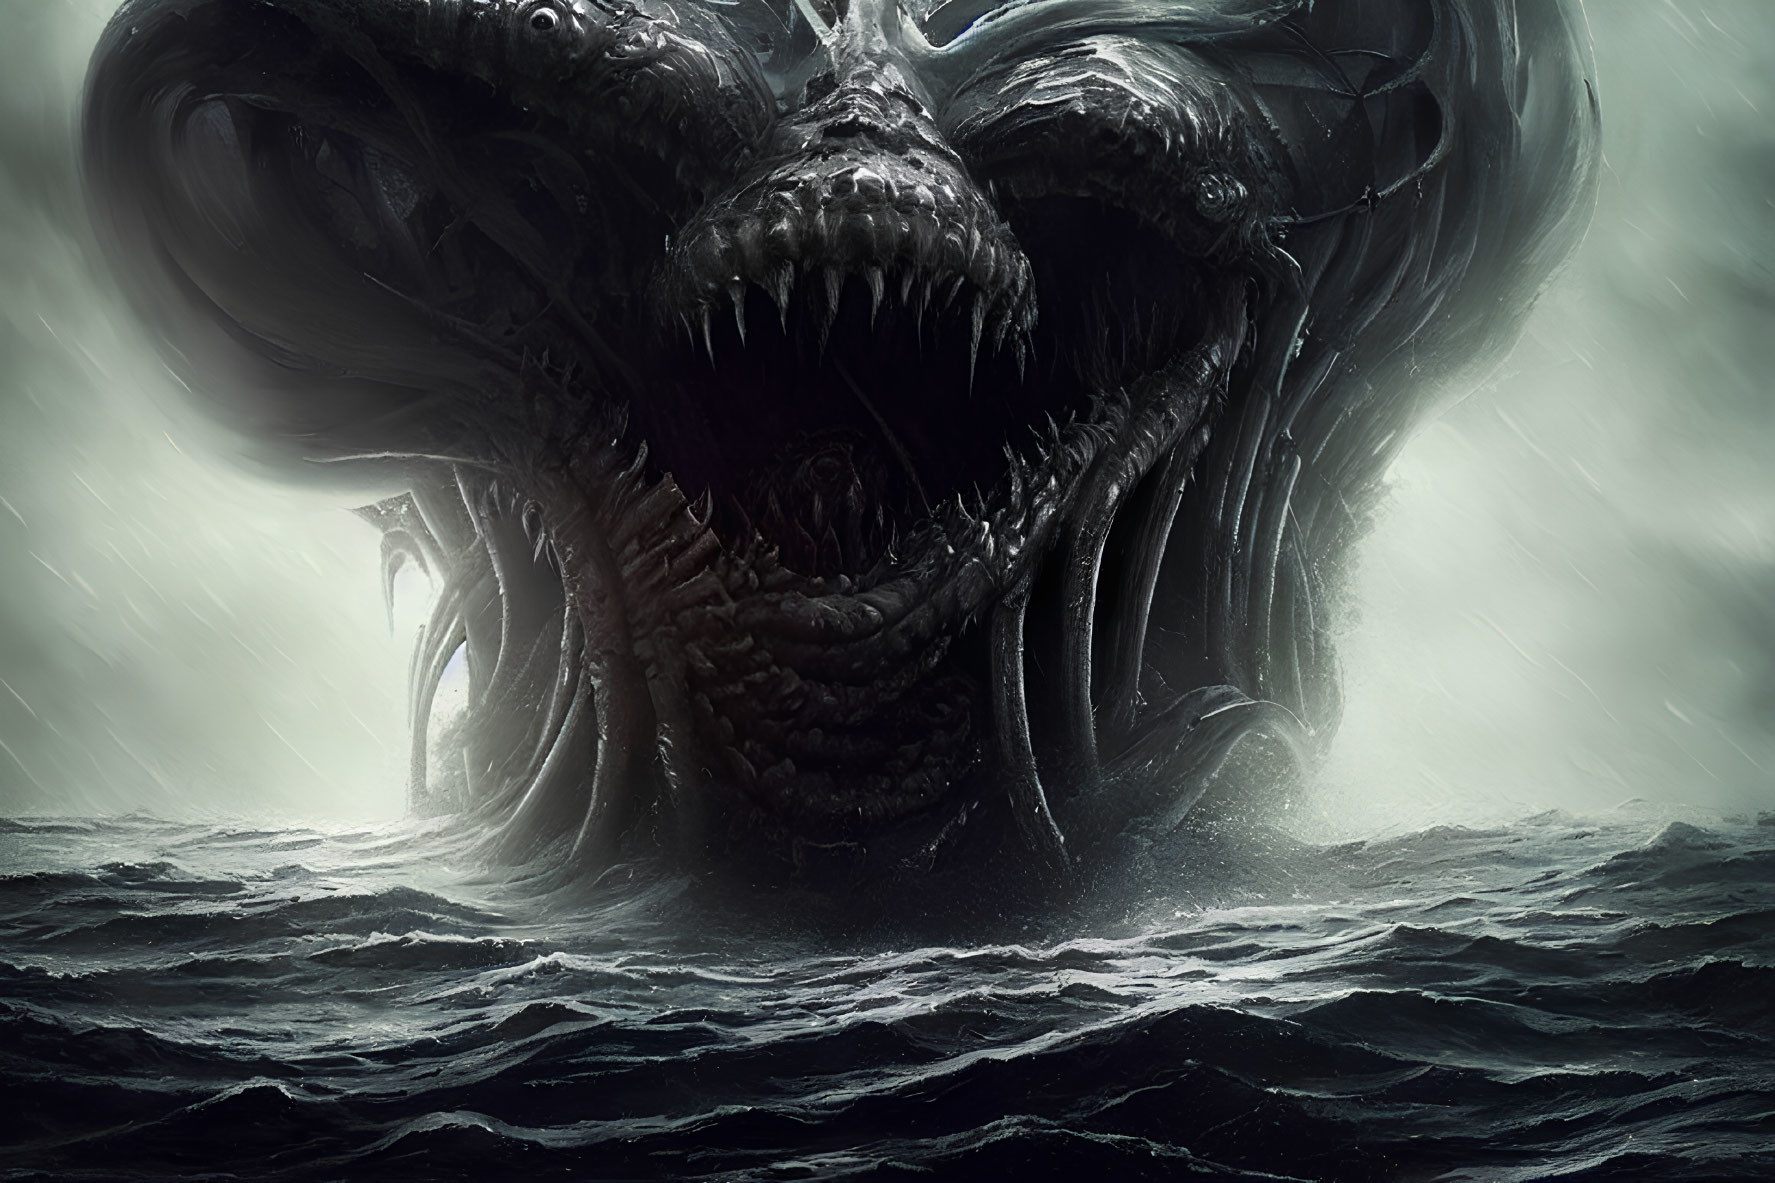 Menacing sea monster with multiple sharp-toothed maws in stormy ocean